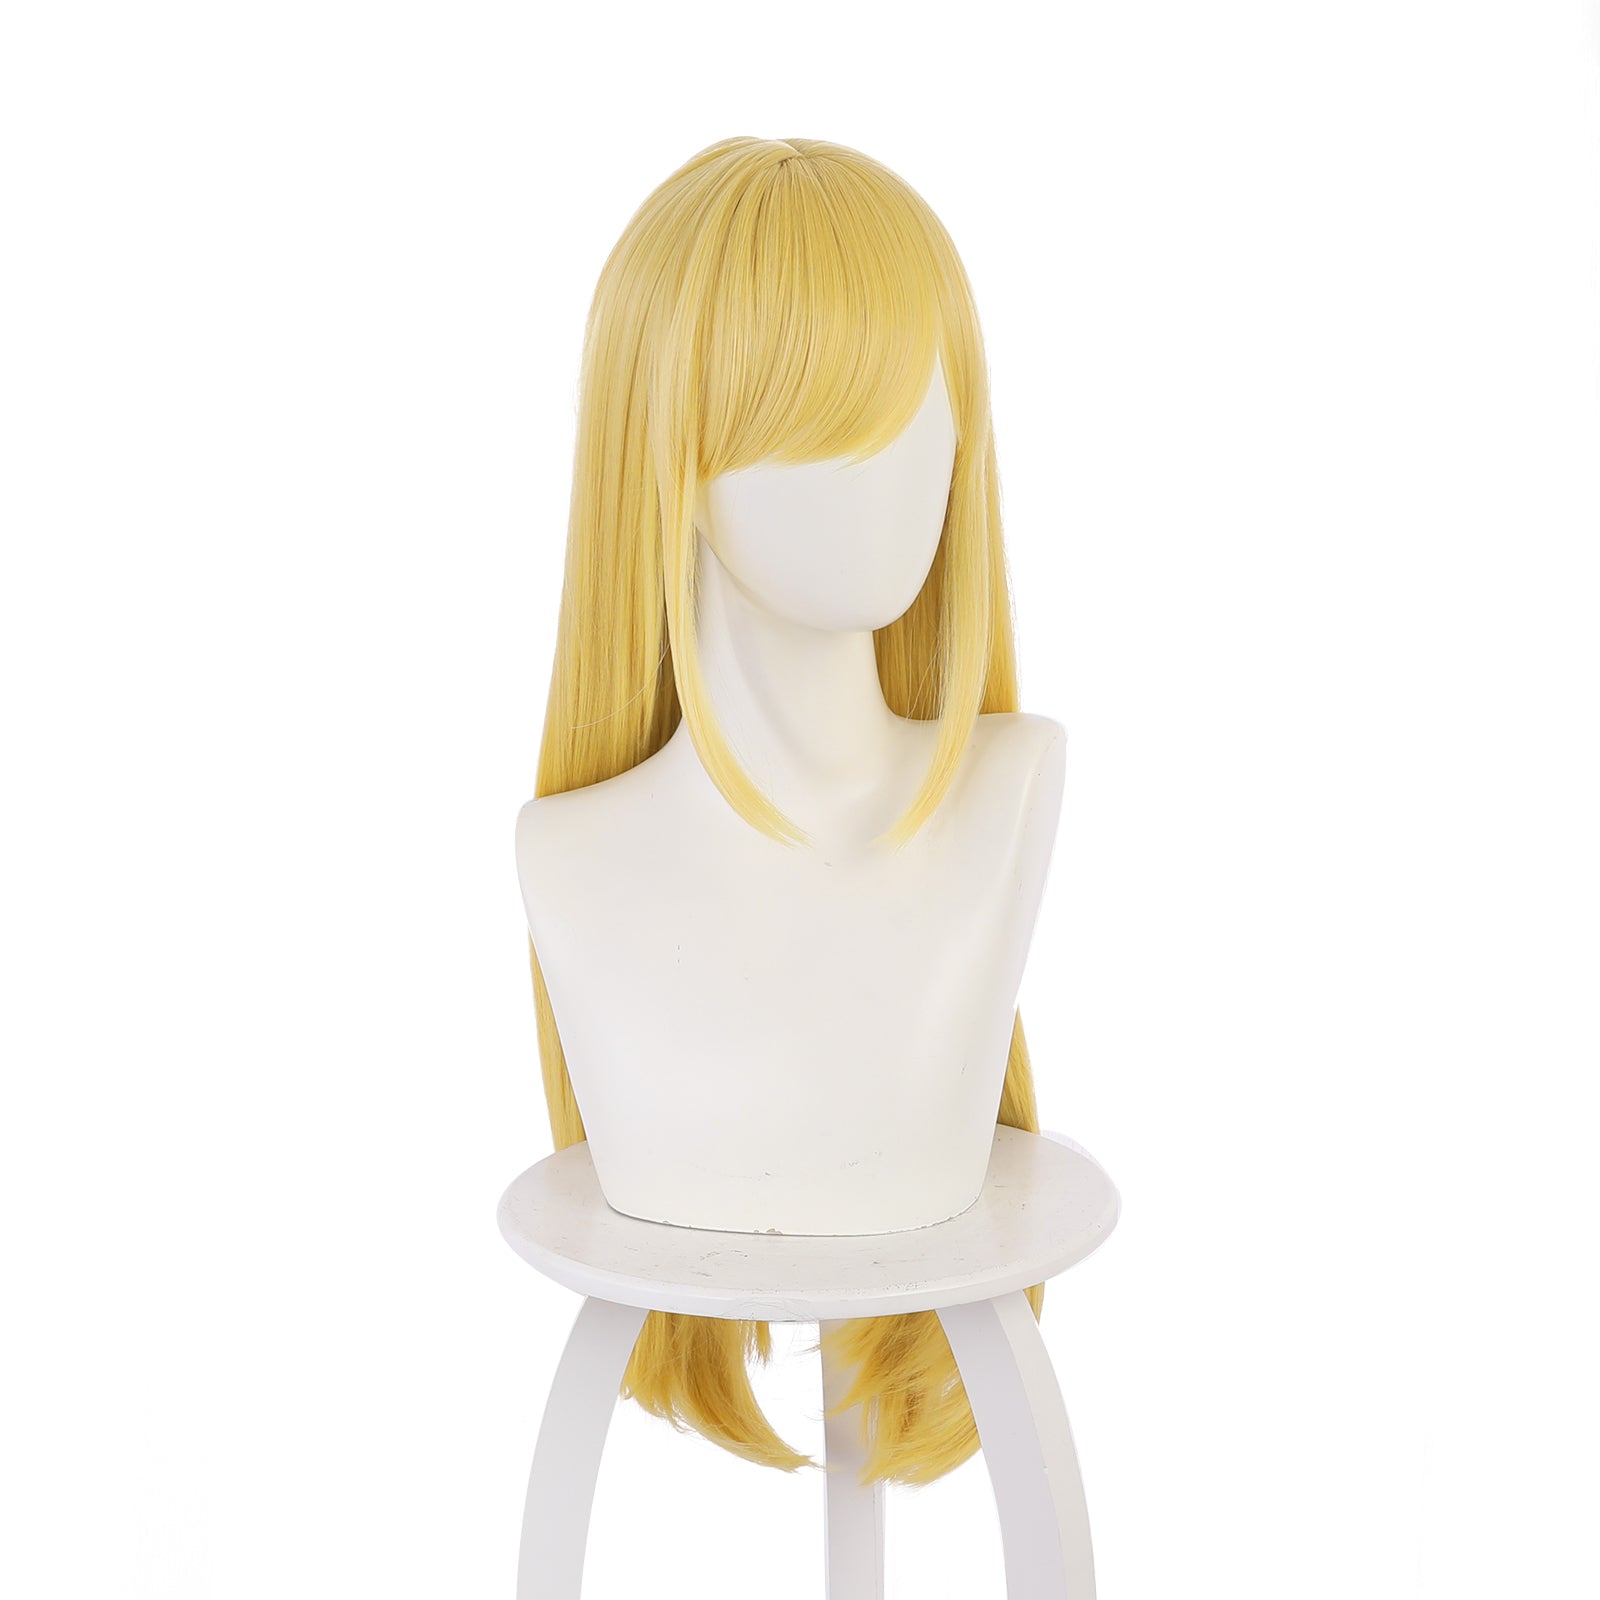 Rulercosplay Anime The Duke of Dearh and His Maid Alice Golden Long Cosplay Wig